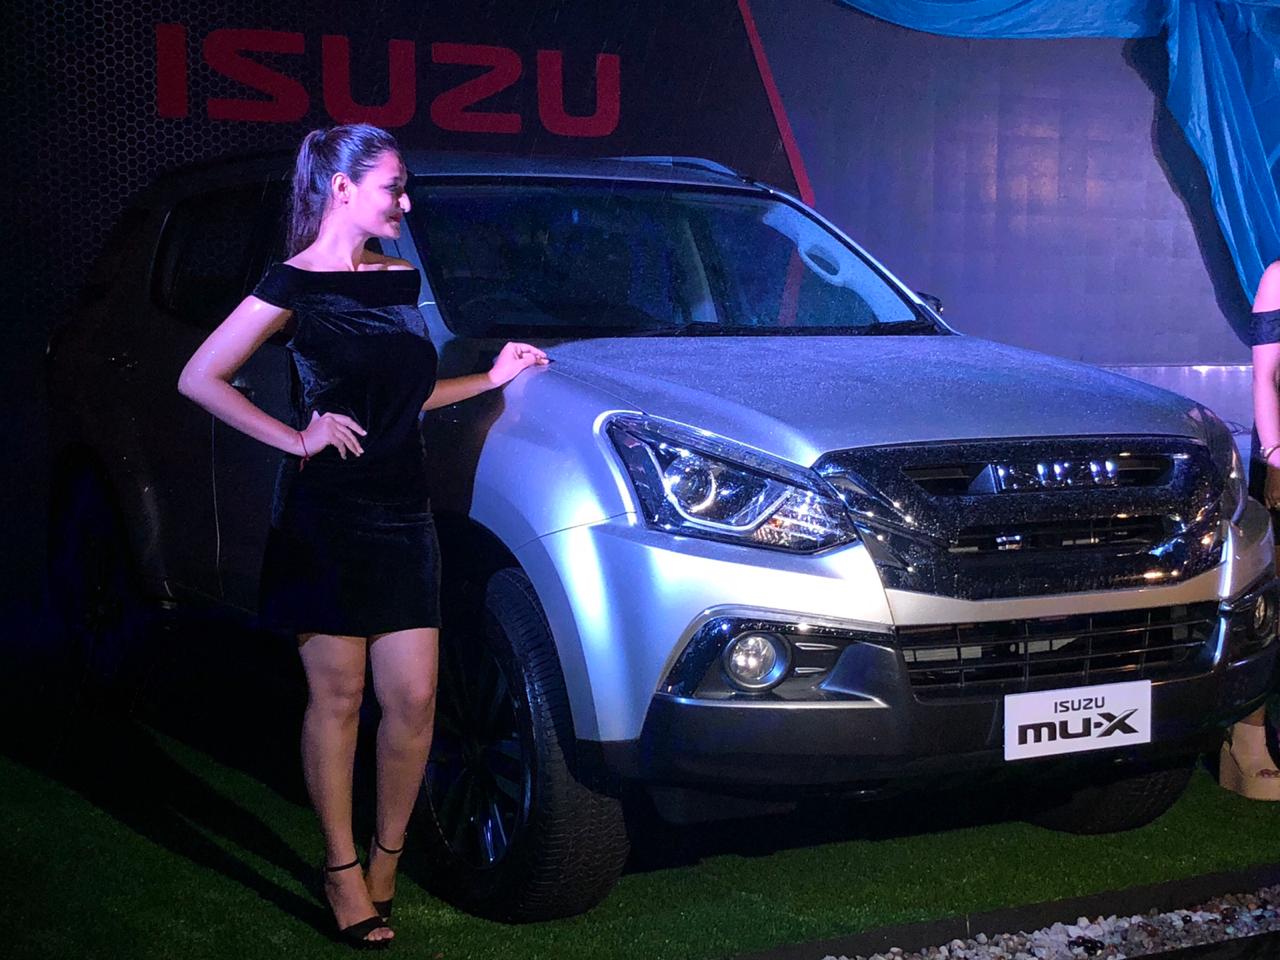 <p>Isuzu launches the MU-X SUV in India at a price of Rs 26.26 lakh for the 4x2 variant (ex-showroom, Hyderabad) and Rs 28.22 lakh for the 4x4 variant.</p>